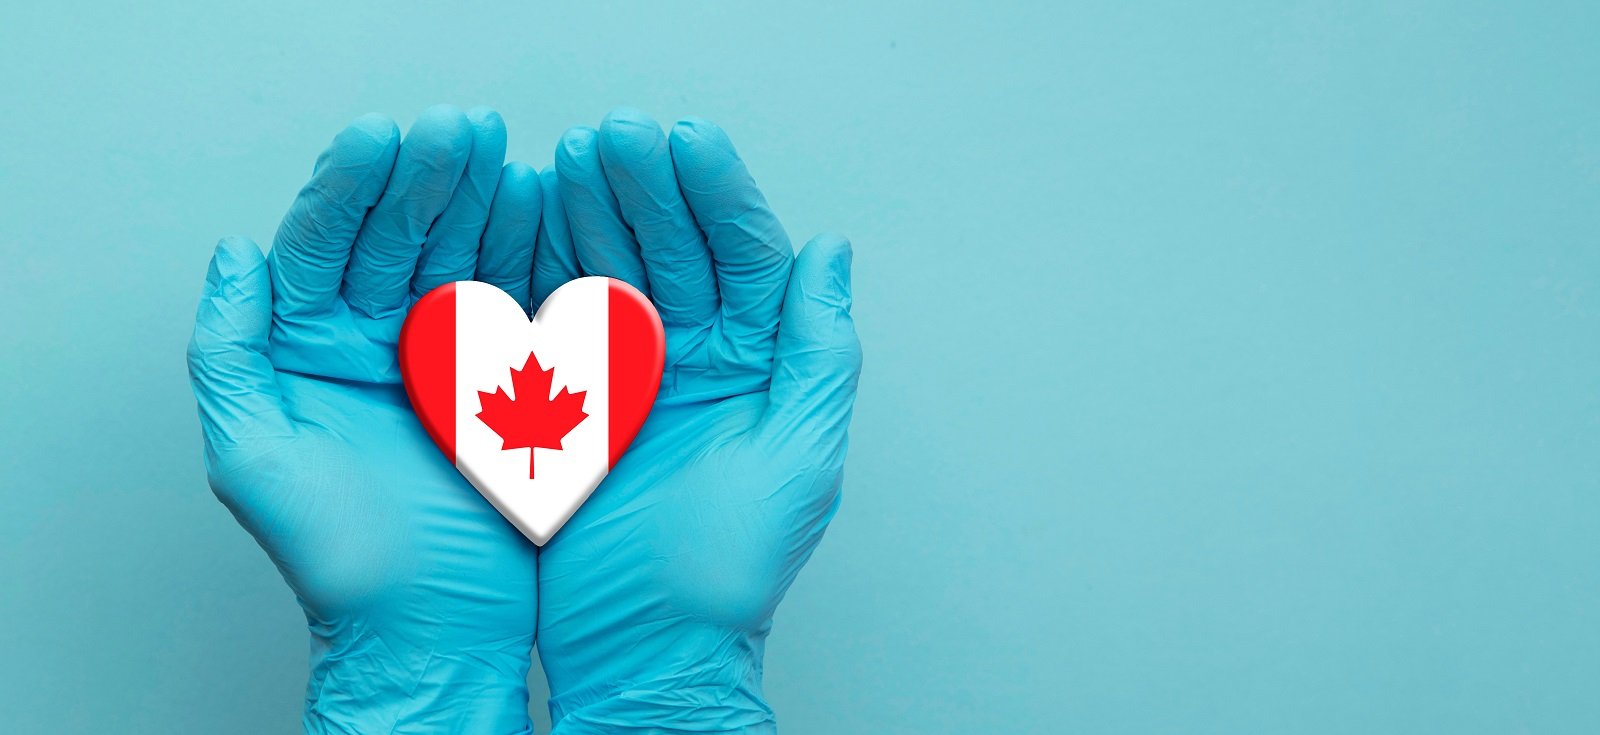 Two gloved hands holding a heart-shaped Canadian flag.